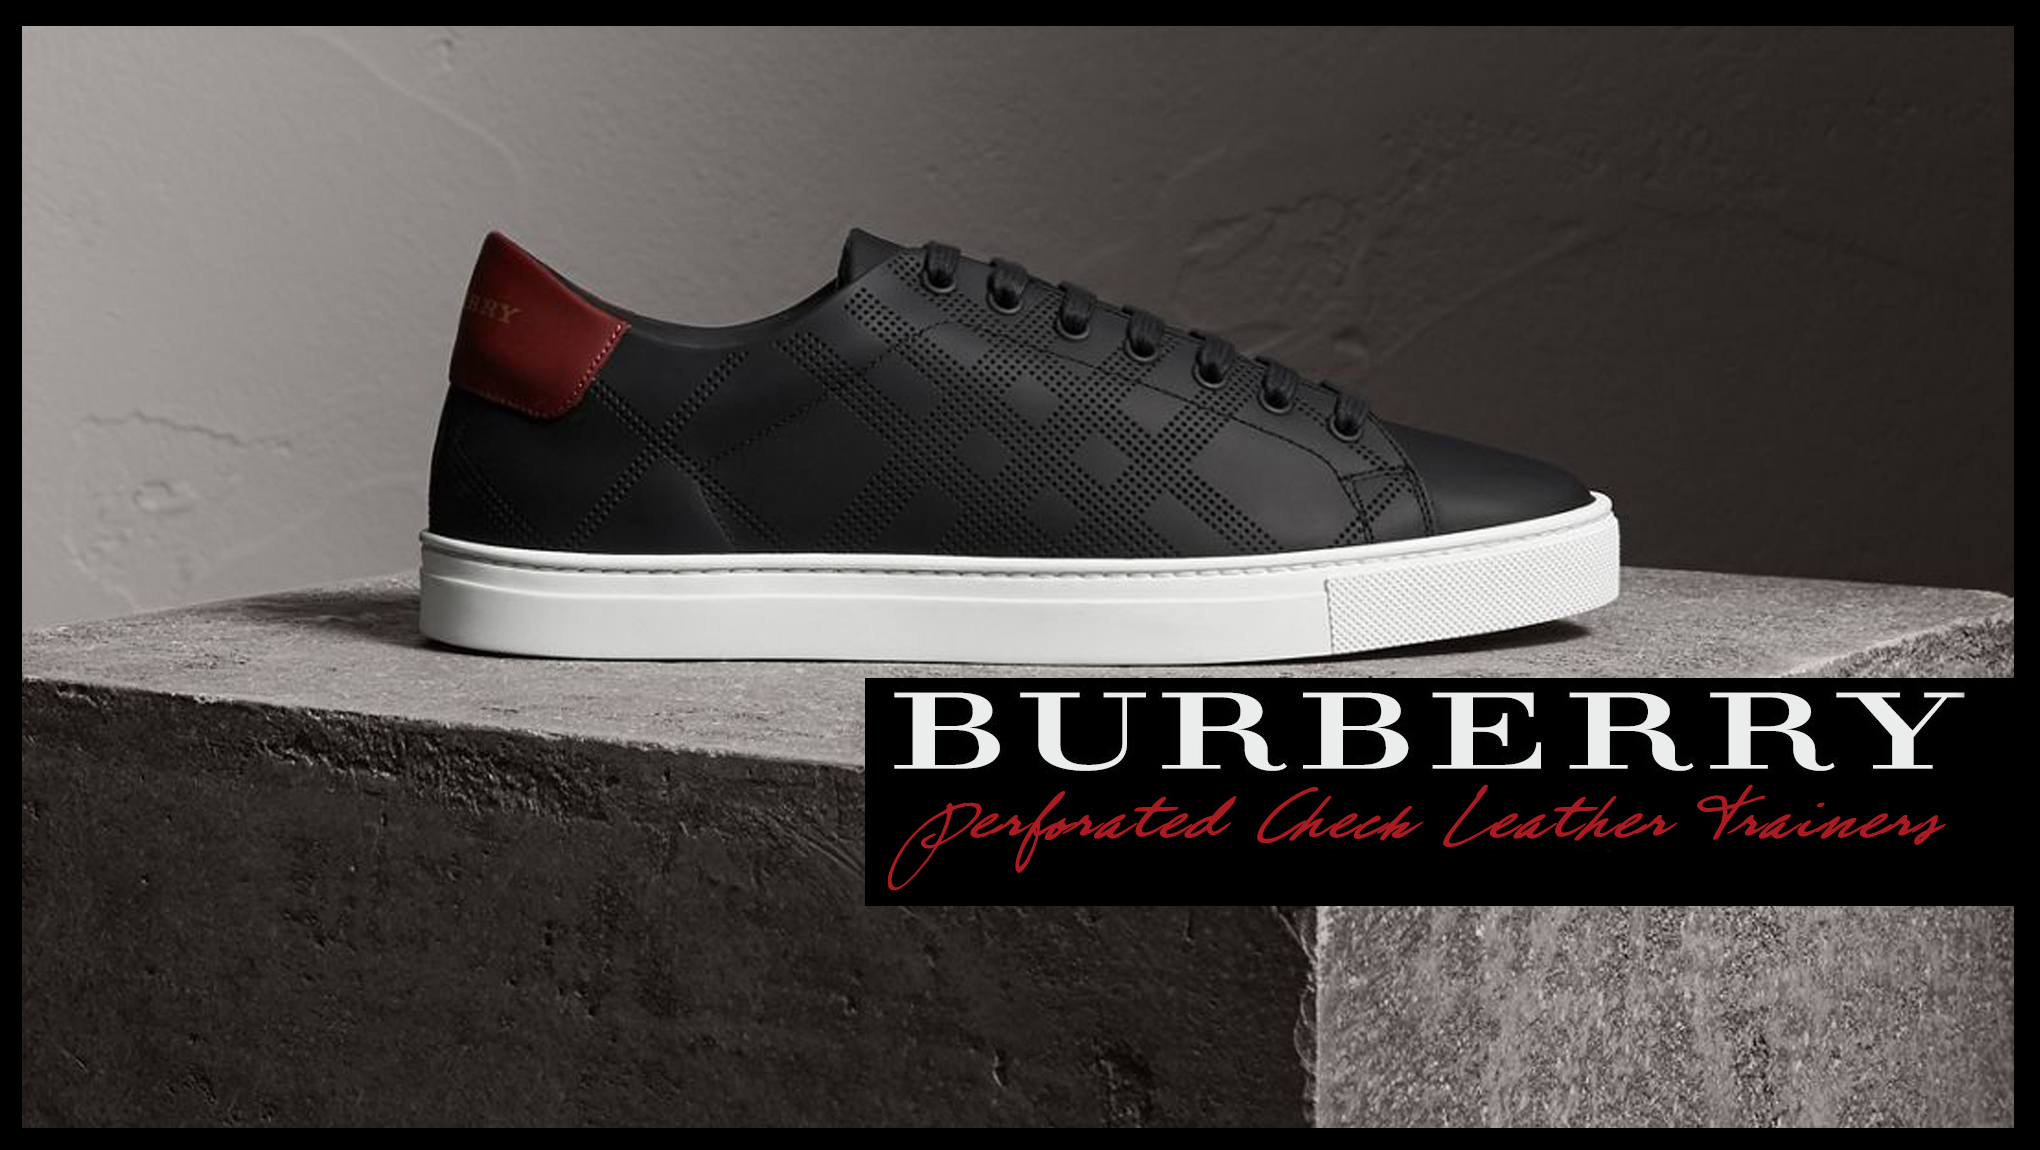 Burberry Perforated Check Leather Trainers,Burberry,cheyan antwaune gray, cheyan gray, antwaune gray, thelifestyleelite,elite lifestyle, thelifestyleelitedotcom, thelifestyleelite.com,tlselite.com,TheLifeStyleElite.com,cheyan antwaune gray,fashion,models of thelifestyleelite.com, the life style elite,the lifestyle elite,elite lifestyle,lifestyleelite.com,cheyan gray,TLSElite,TLSElite.com,TLSEliteGaming,TLSElite Gaming